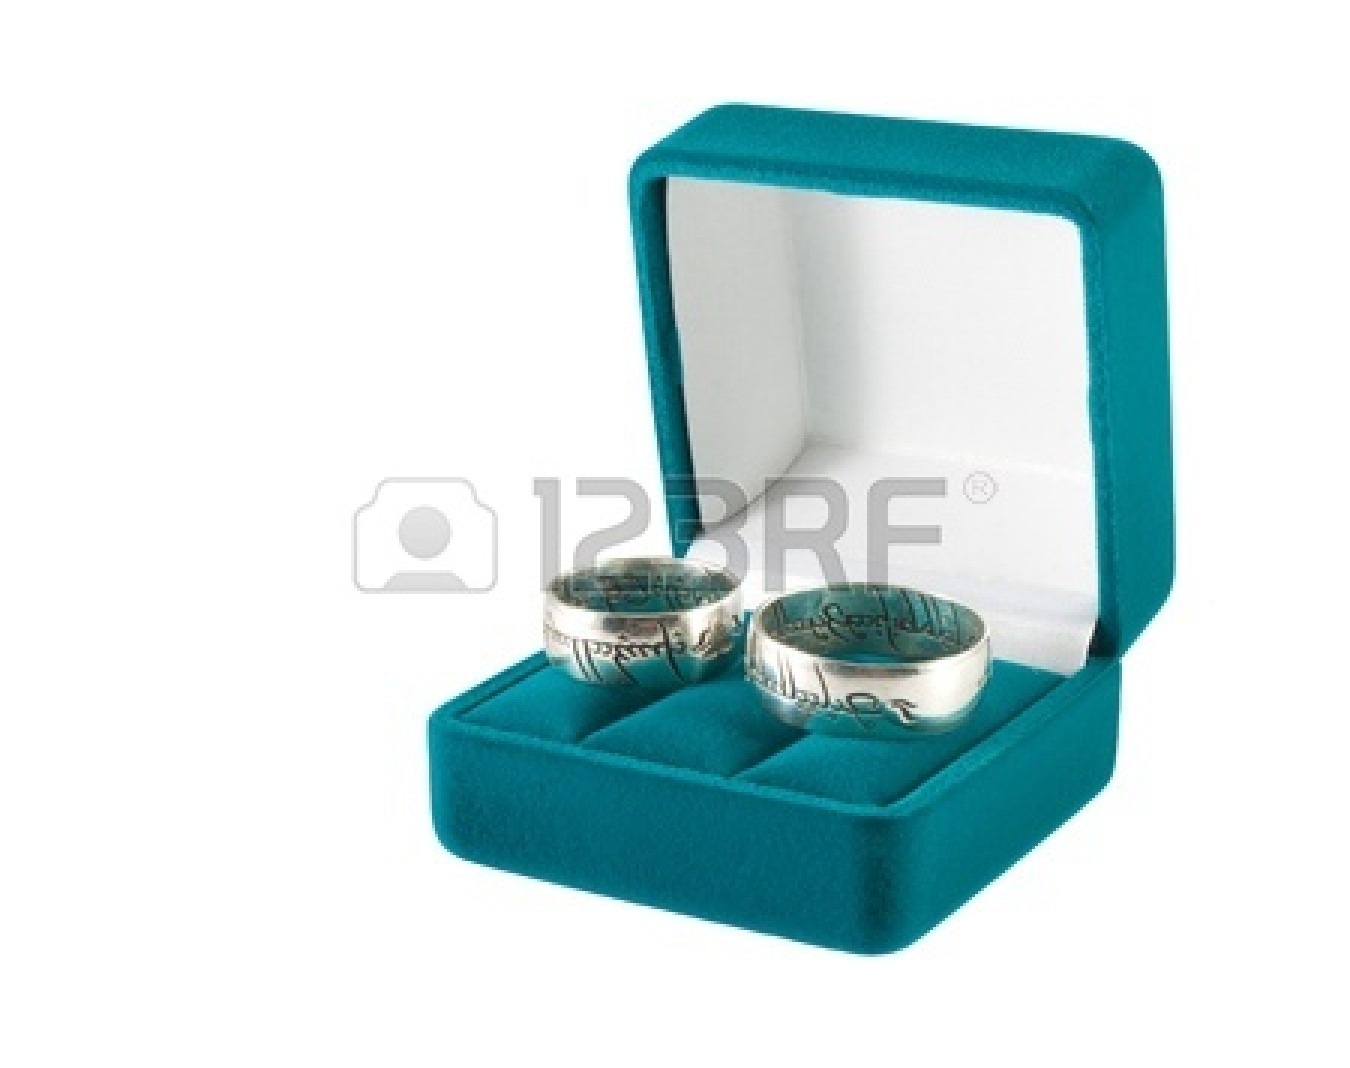 Wedding Gift Box 11700655 Wedding Rings In An Open Gift Box On White    